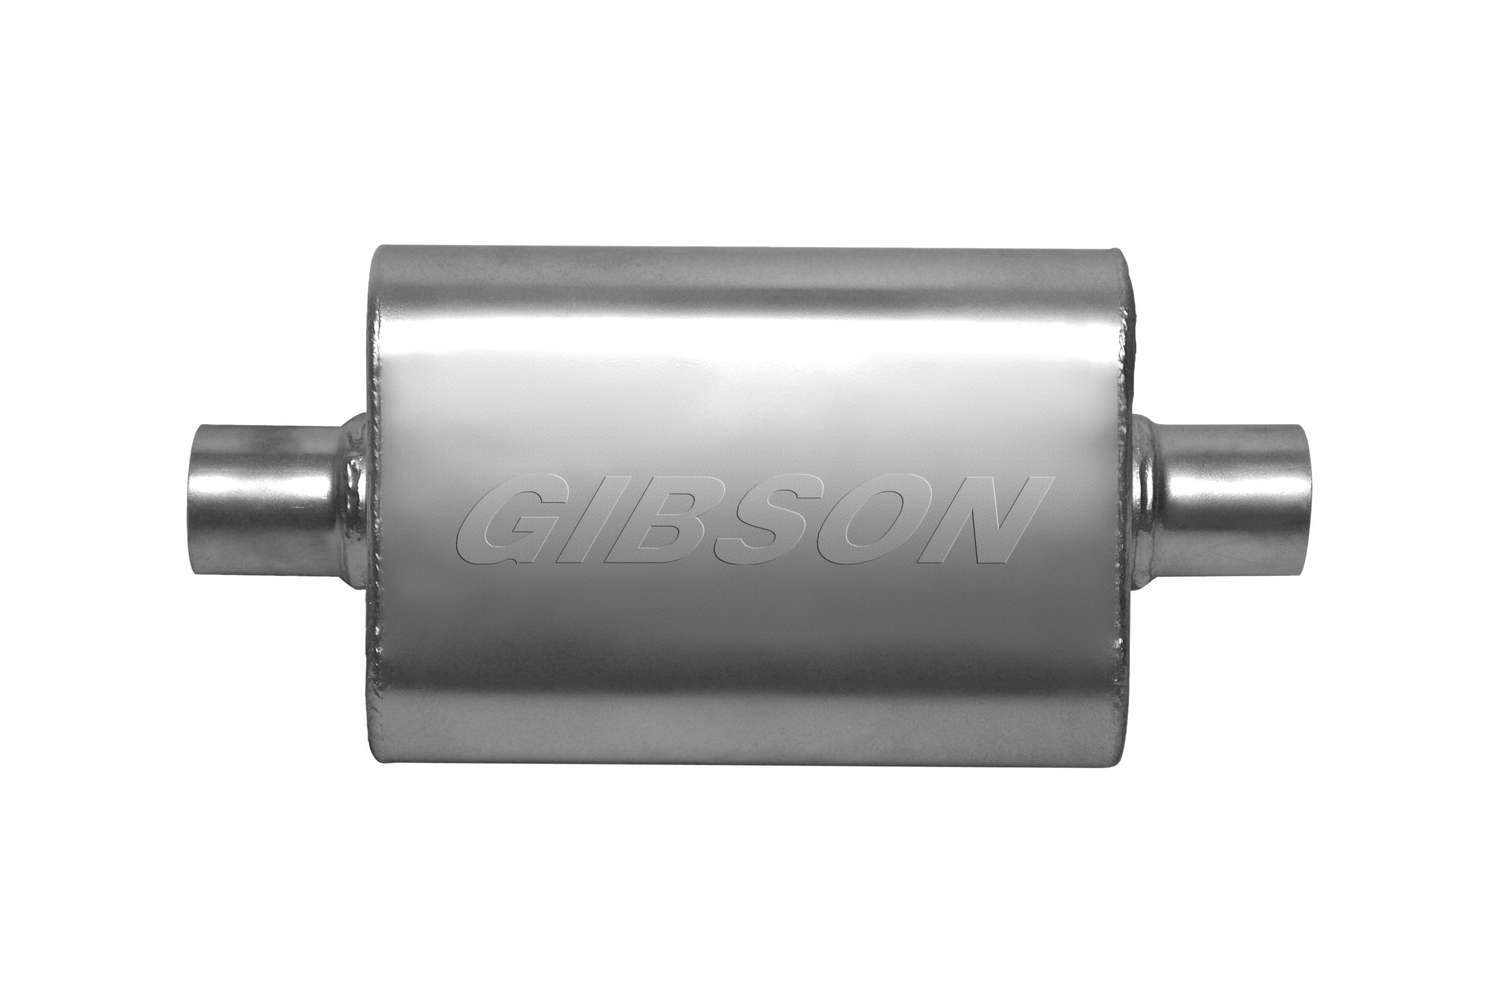 Gibson Exhaust 55112S Muffler, 2-1/2 in Center Inlet, 2-1/2 in Center Outlet, 13 x 9 x 4 in Oval Body, 19 in Long, Stainless, Natural, Universal, Each